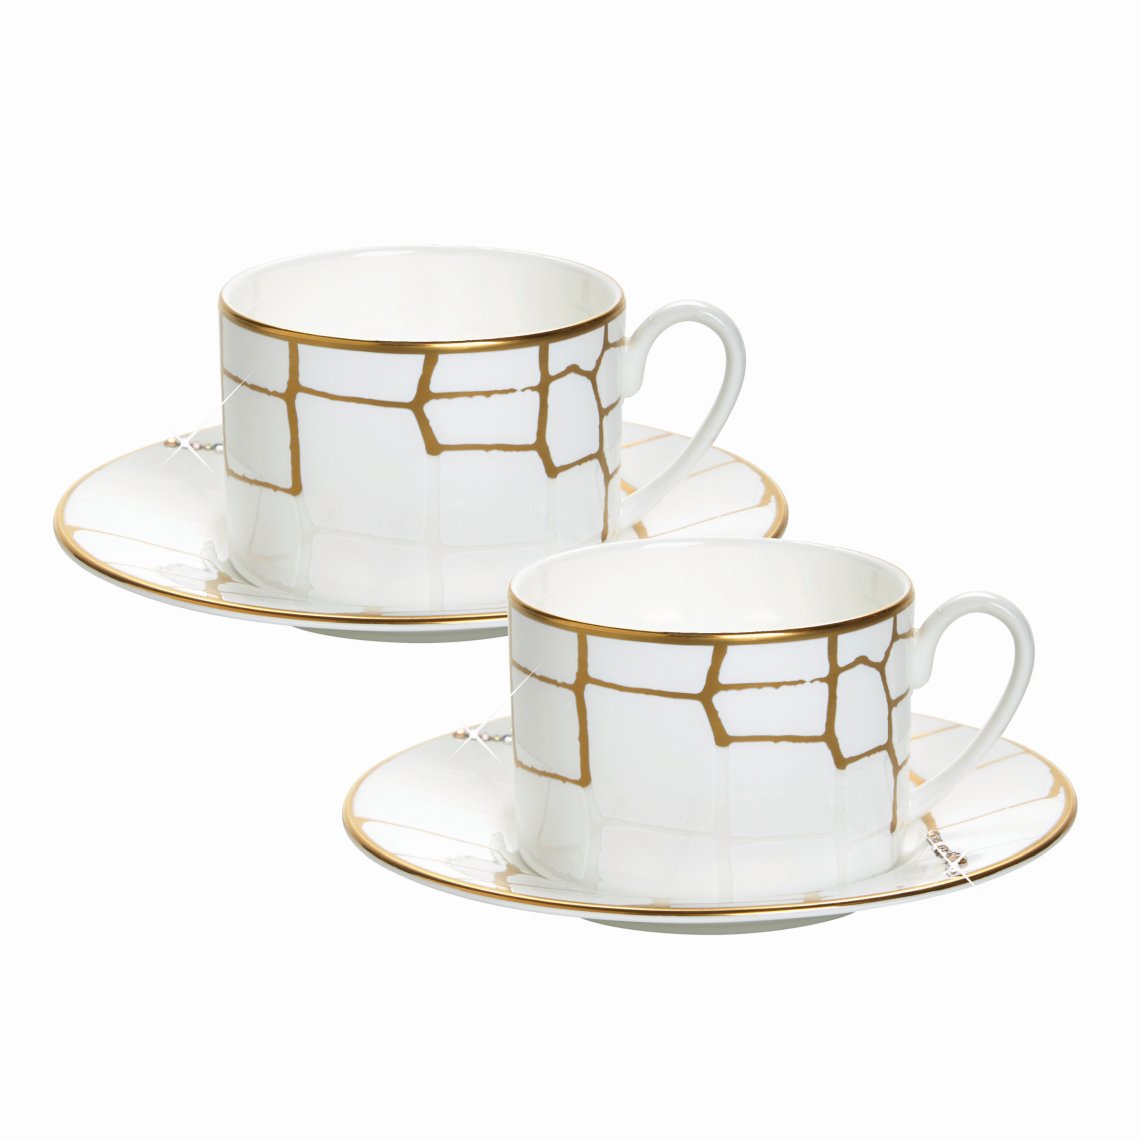 Alligator Gold Set of 2, Cups & Saucers w/ Crystals White Background Photo